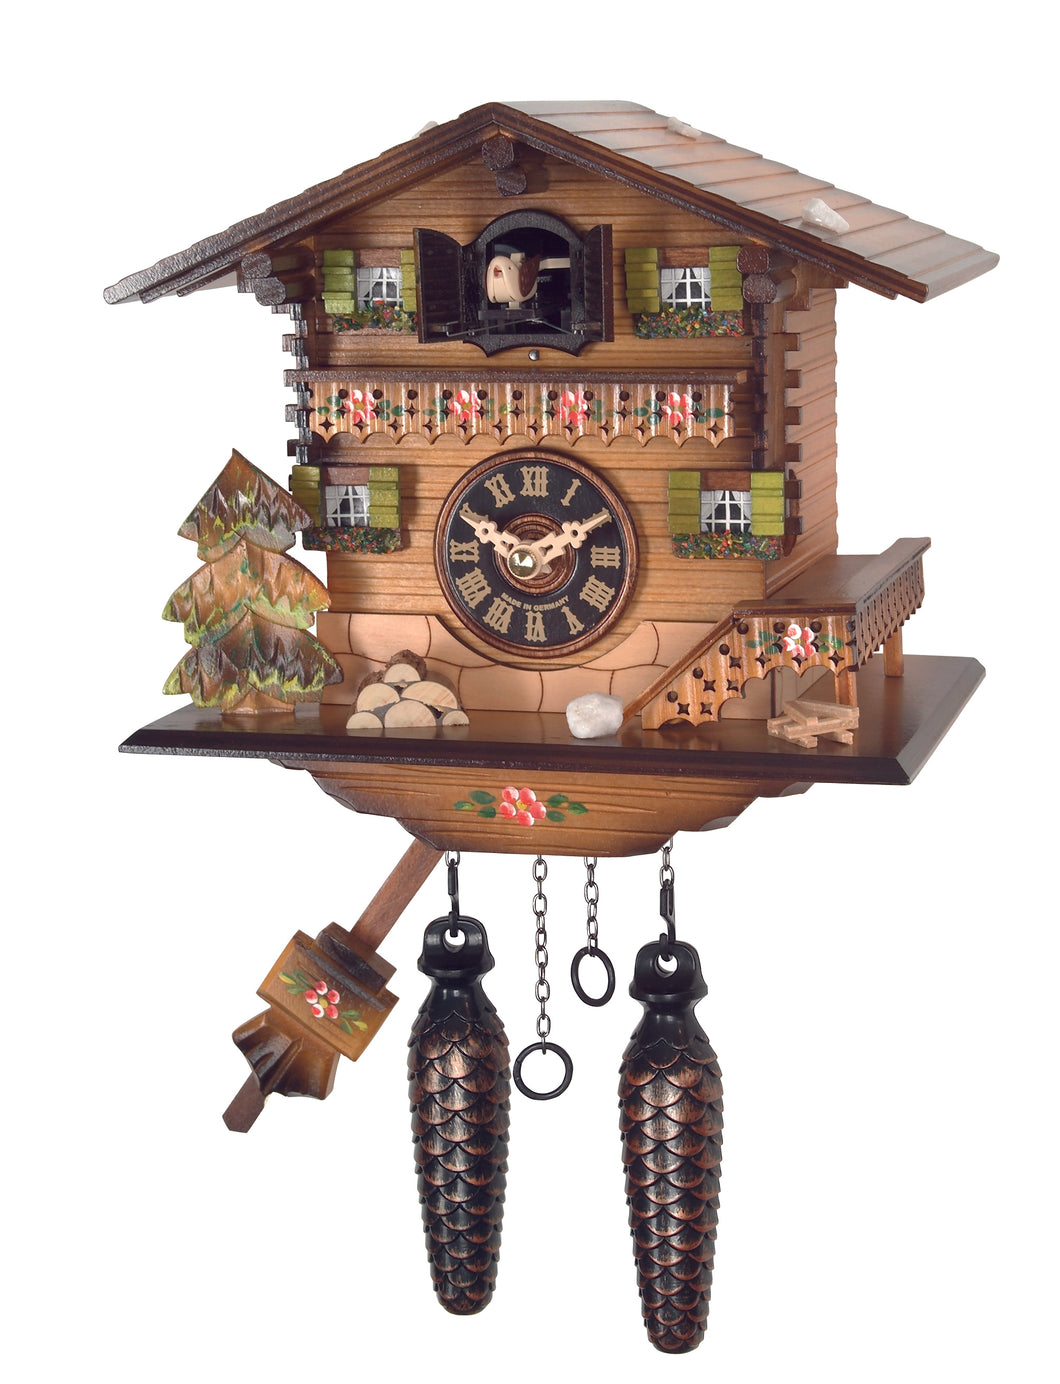 NEW- German Chalet Clock - Hand Painted